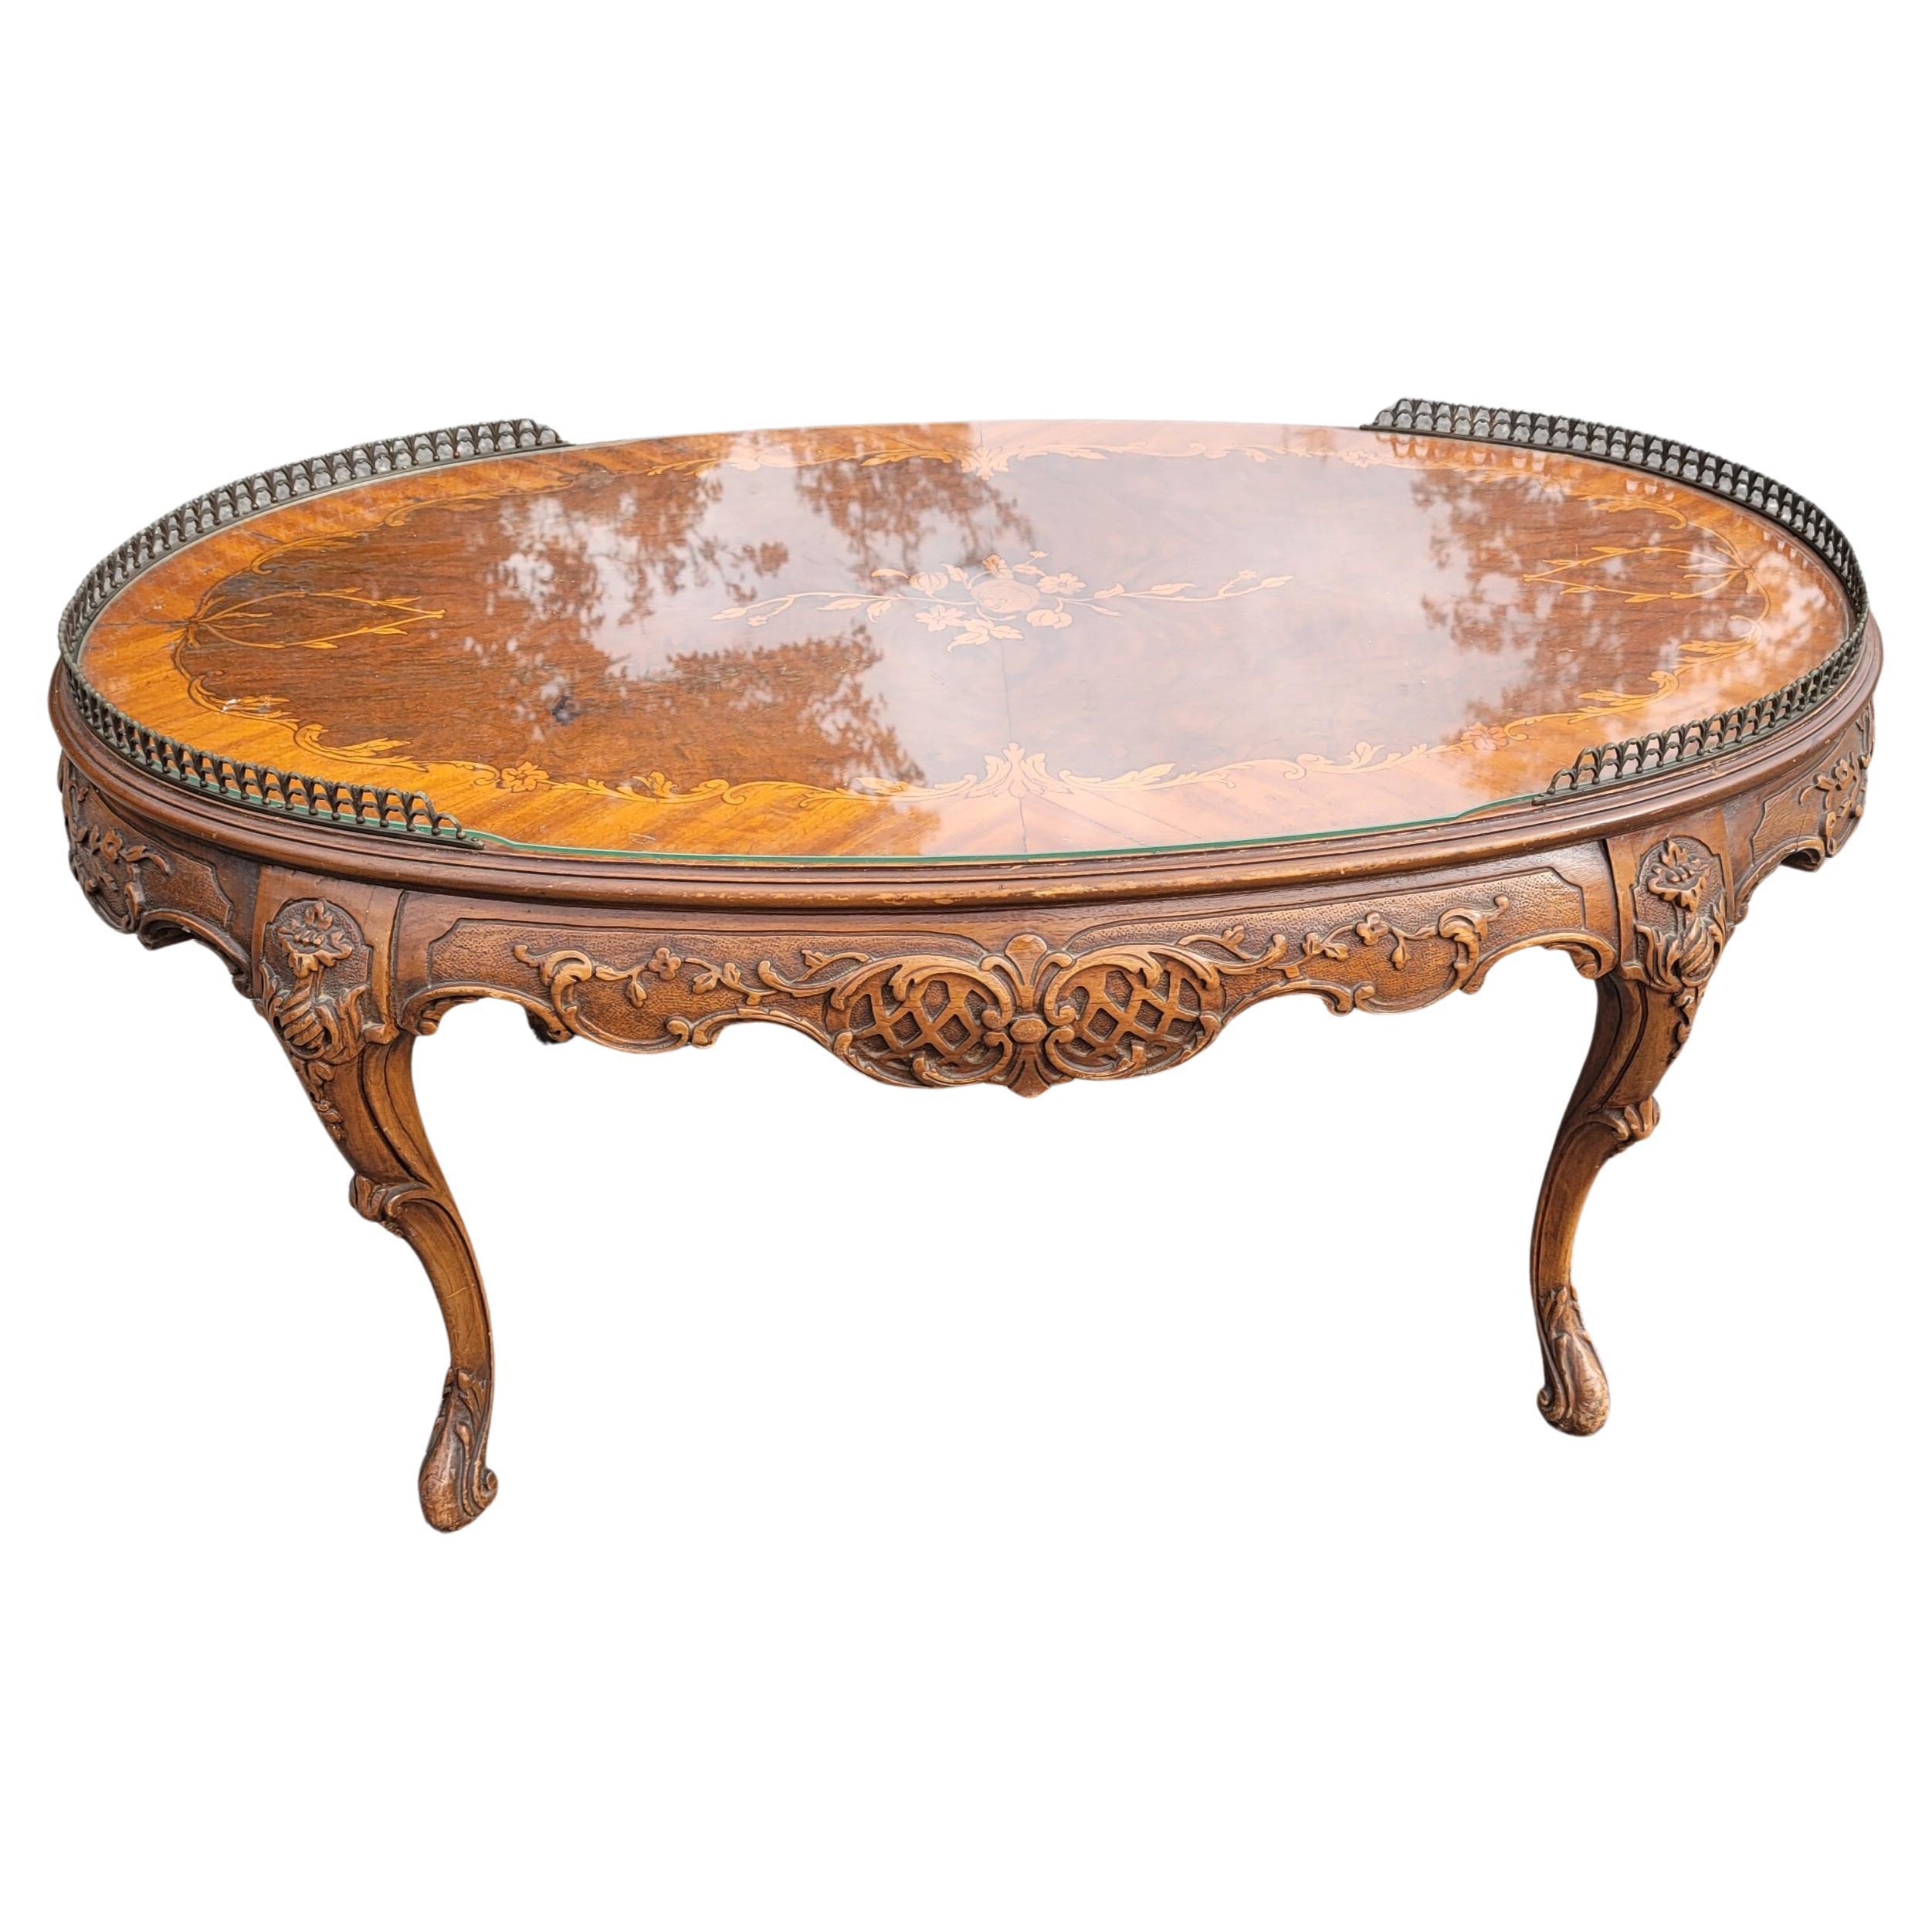 Lovely French Louis XV intricately carved walnut side petite oval coffee table having gorgous inlay floral marquetry decoration and partial sides Gallery. Comes with a Protective Glass Top.
Measures 37